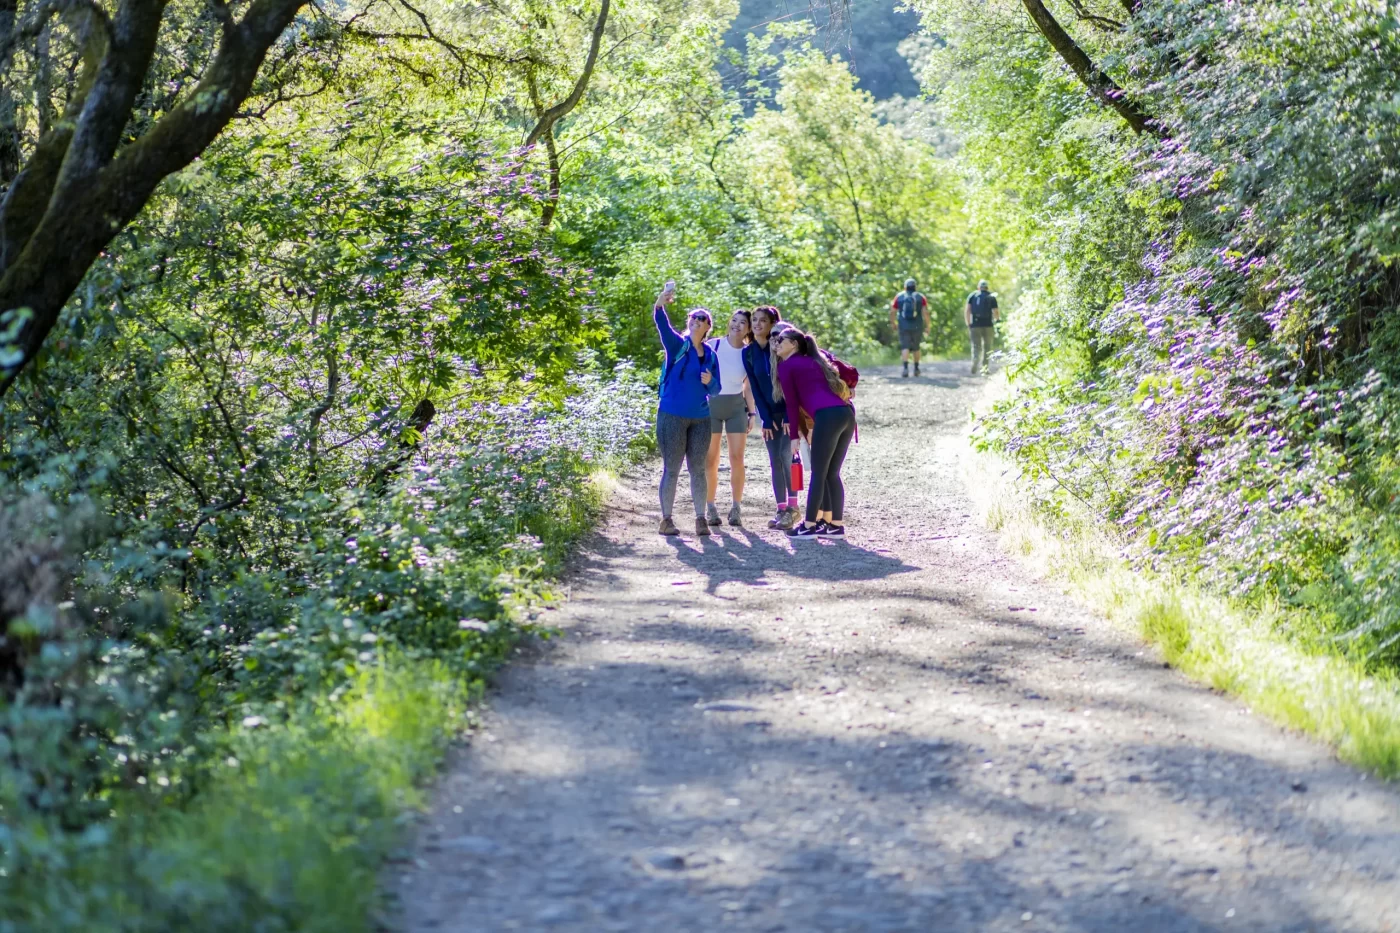 4 Reasons Placer County is a Hiking Haven